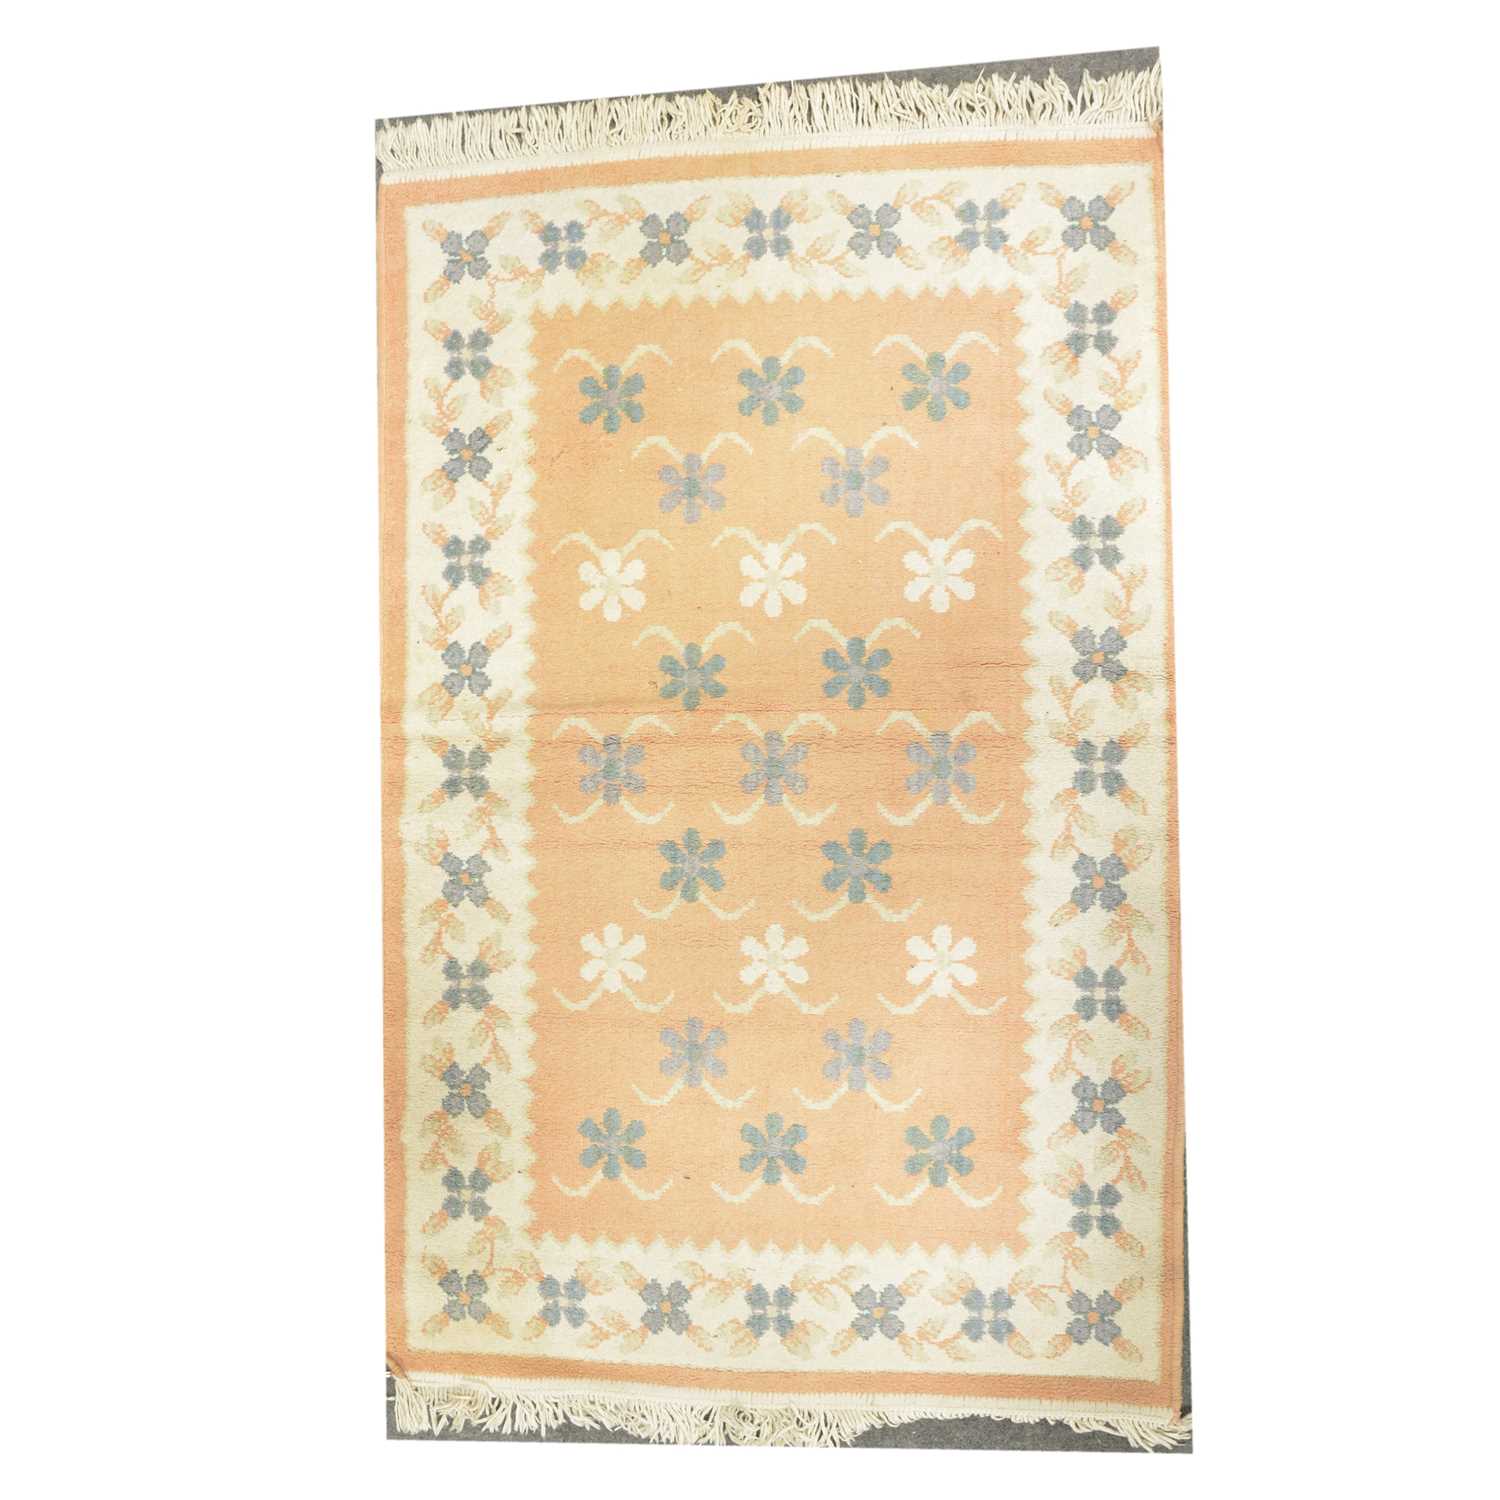 Four small modern rugs, - Image 2 of 4